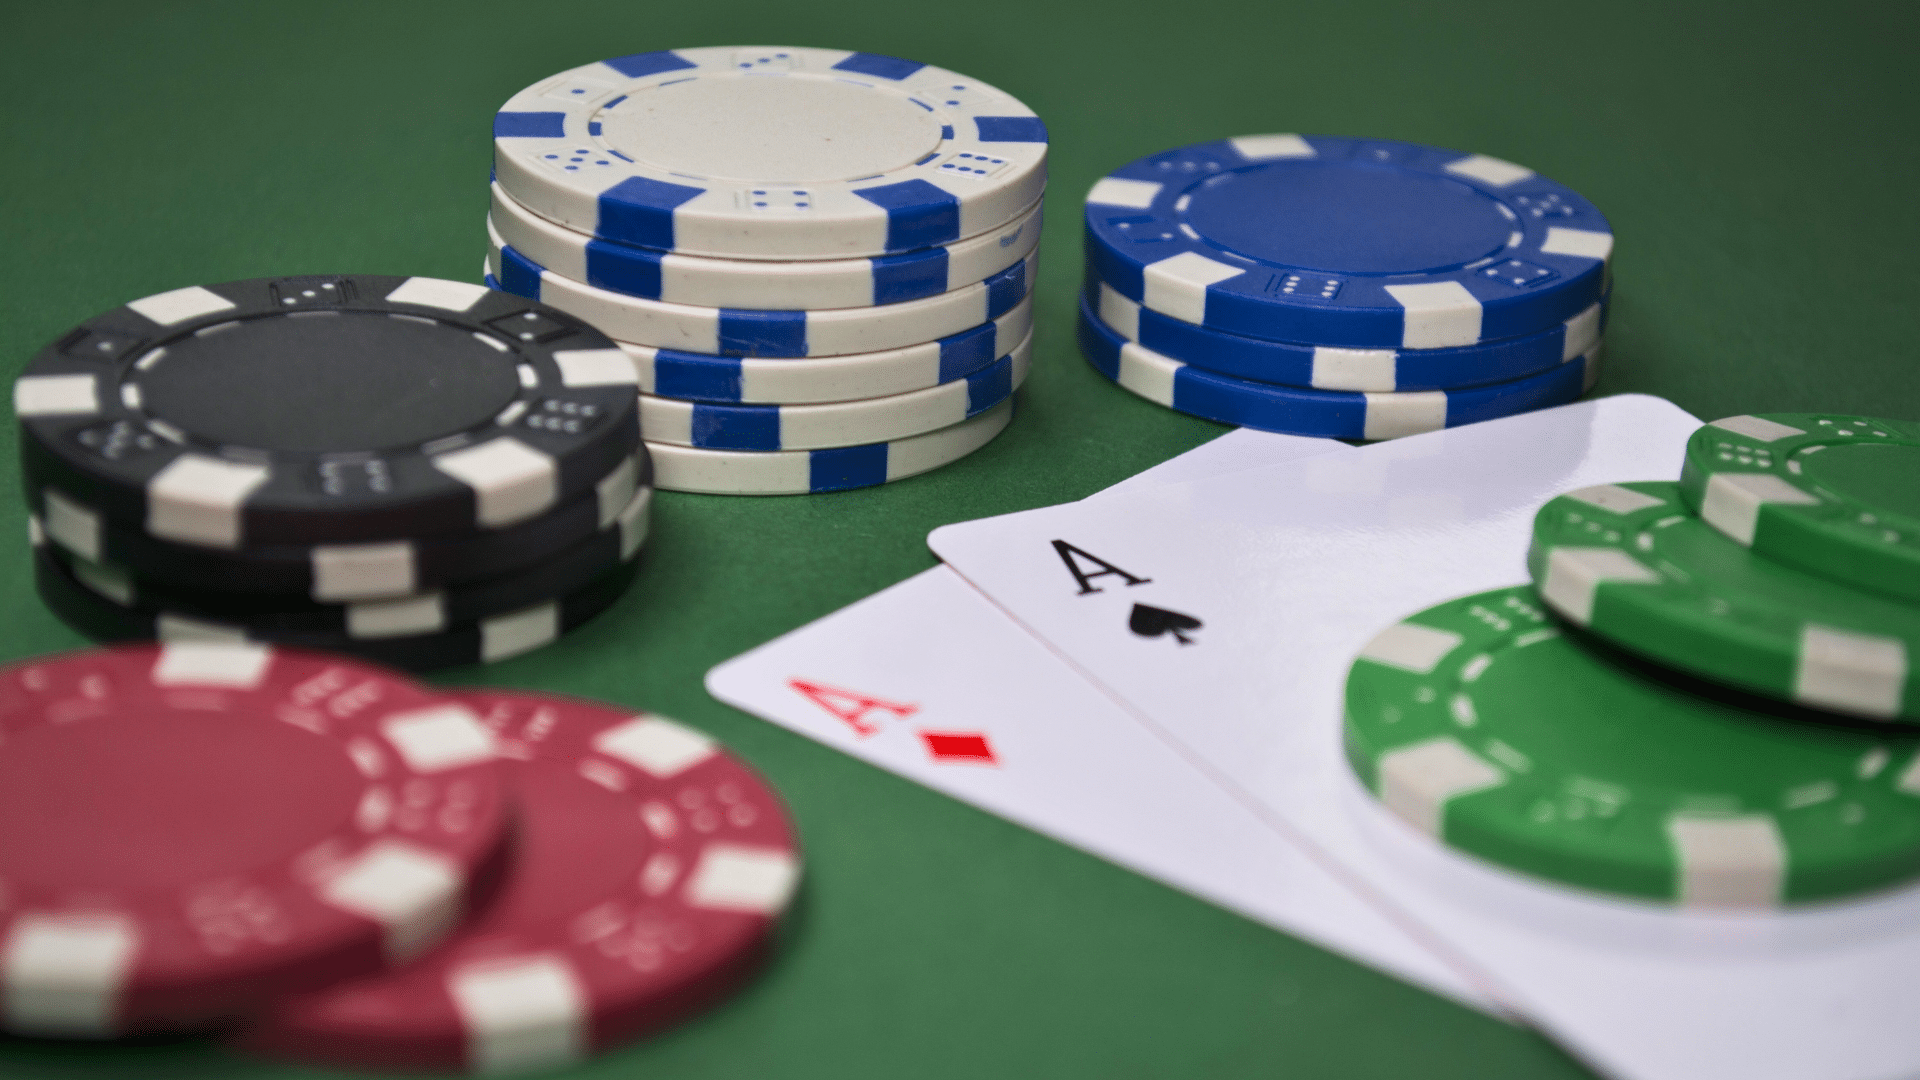 5 Common Beginner Mistakes in Sit and Go Tournaments (and How to Avoid Them)